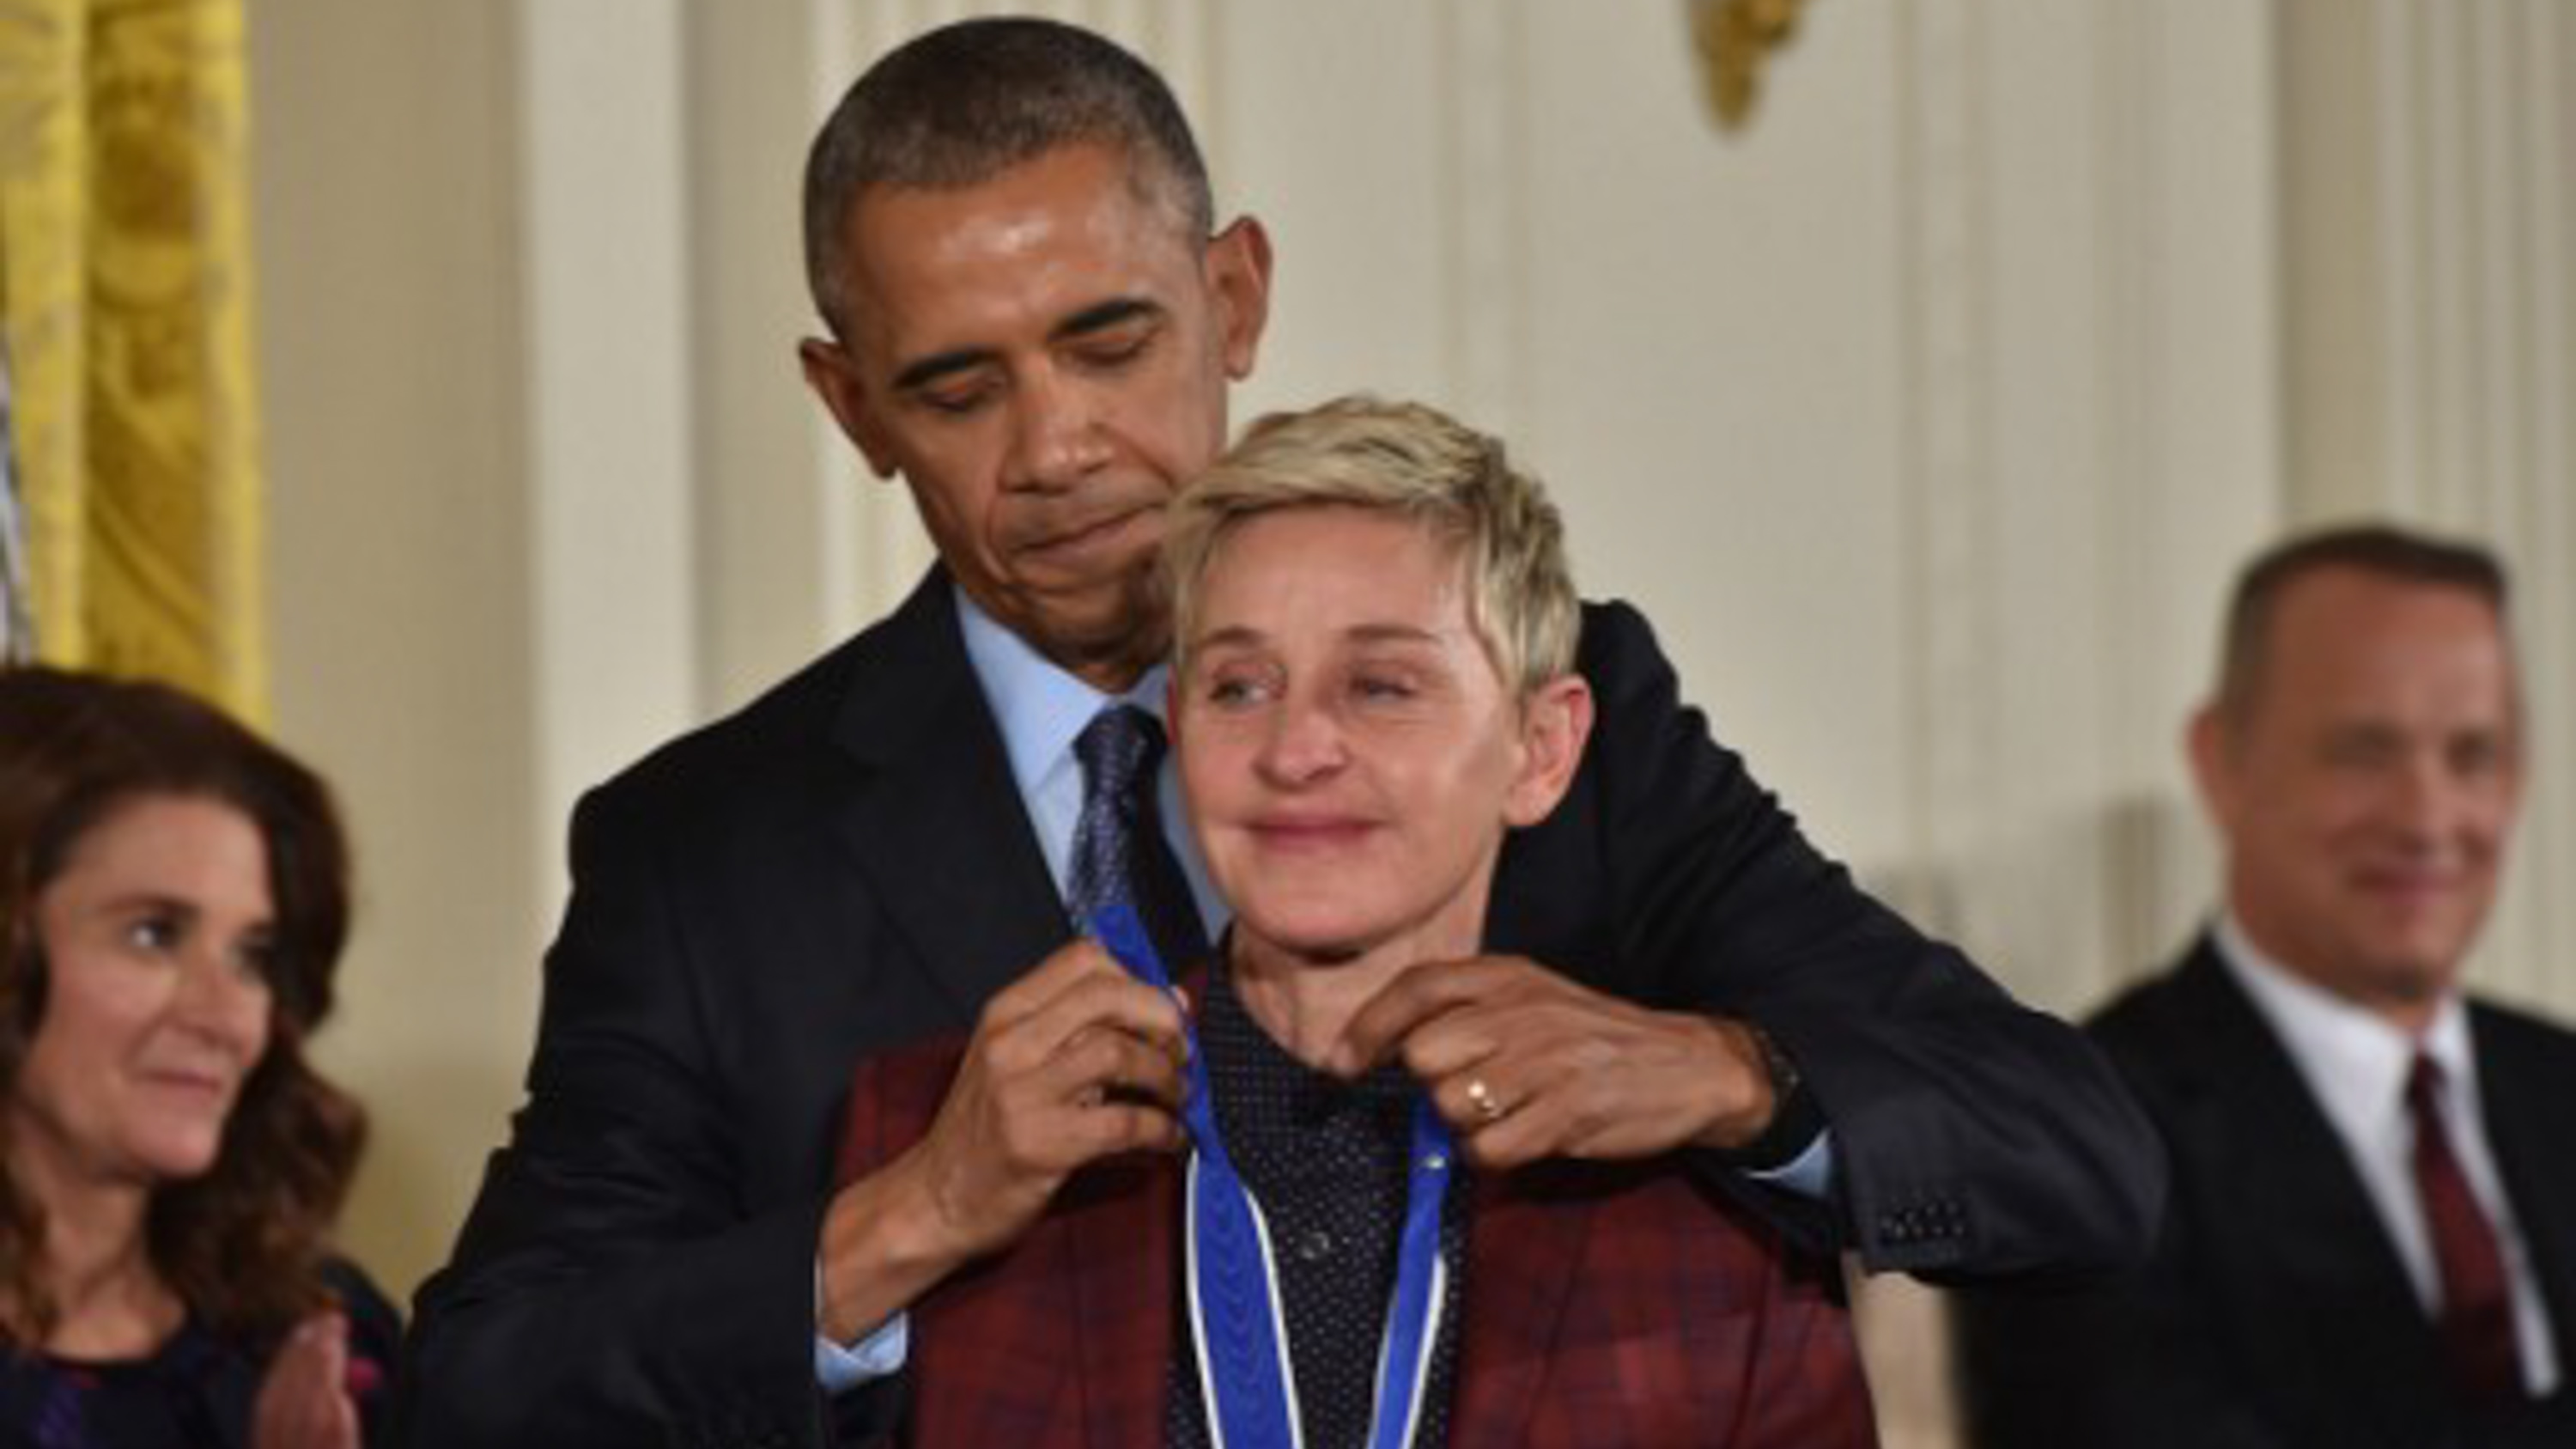 ELLEN DEGENERES. US President Barack Obama presents actress and comedian Ellen DeGeneres with the Presidential Medal of Freedom, the nation's highest civilian honor. Photo by Nicholas Kamm/AFP Photo  